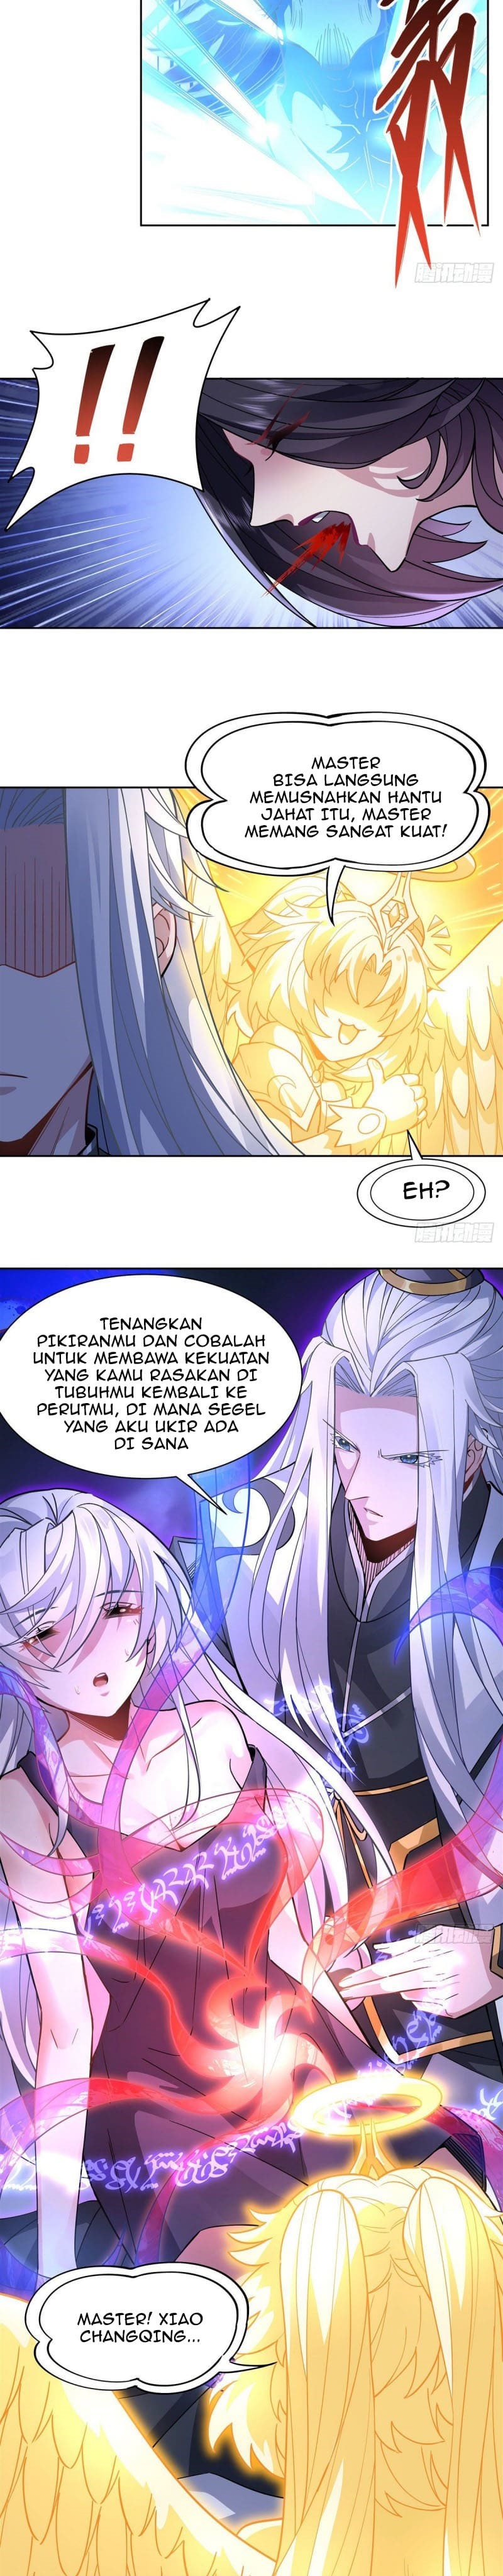 Dilarang COPAS - situs resmi www.mangacanblog.com - Komik my female apprentices are all big shots from the future 039 - chapter 39 40 Indonesia my female apprentices are all big shots from the future 039 - chapter 39 Terbaru 17|Baca Manga Komik Indonesia|Mangacan